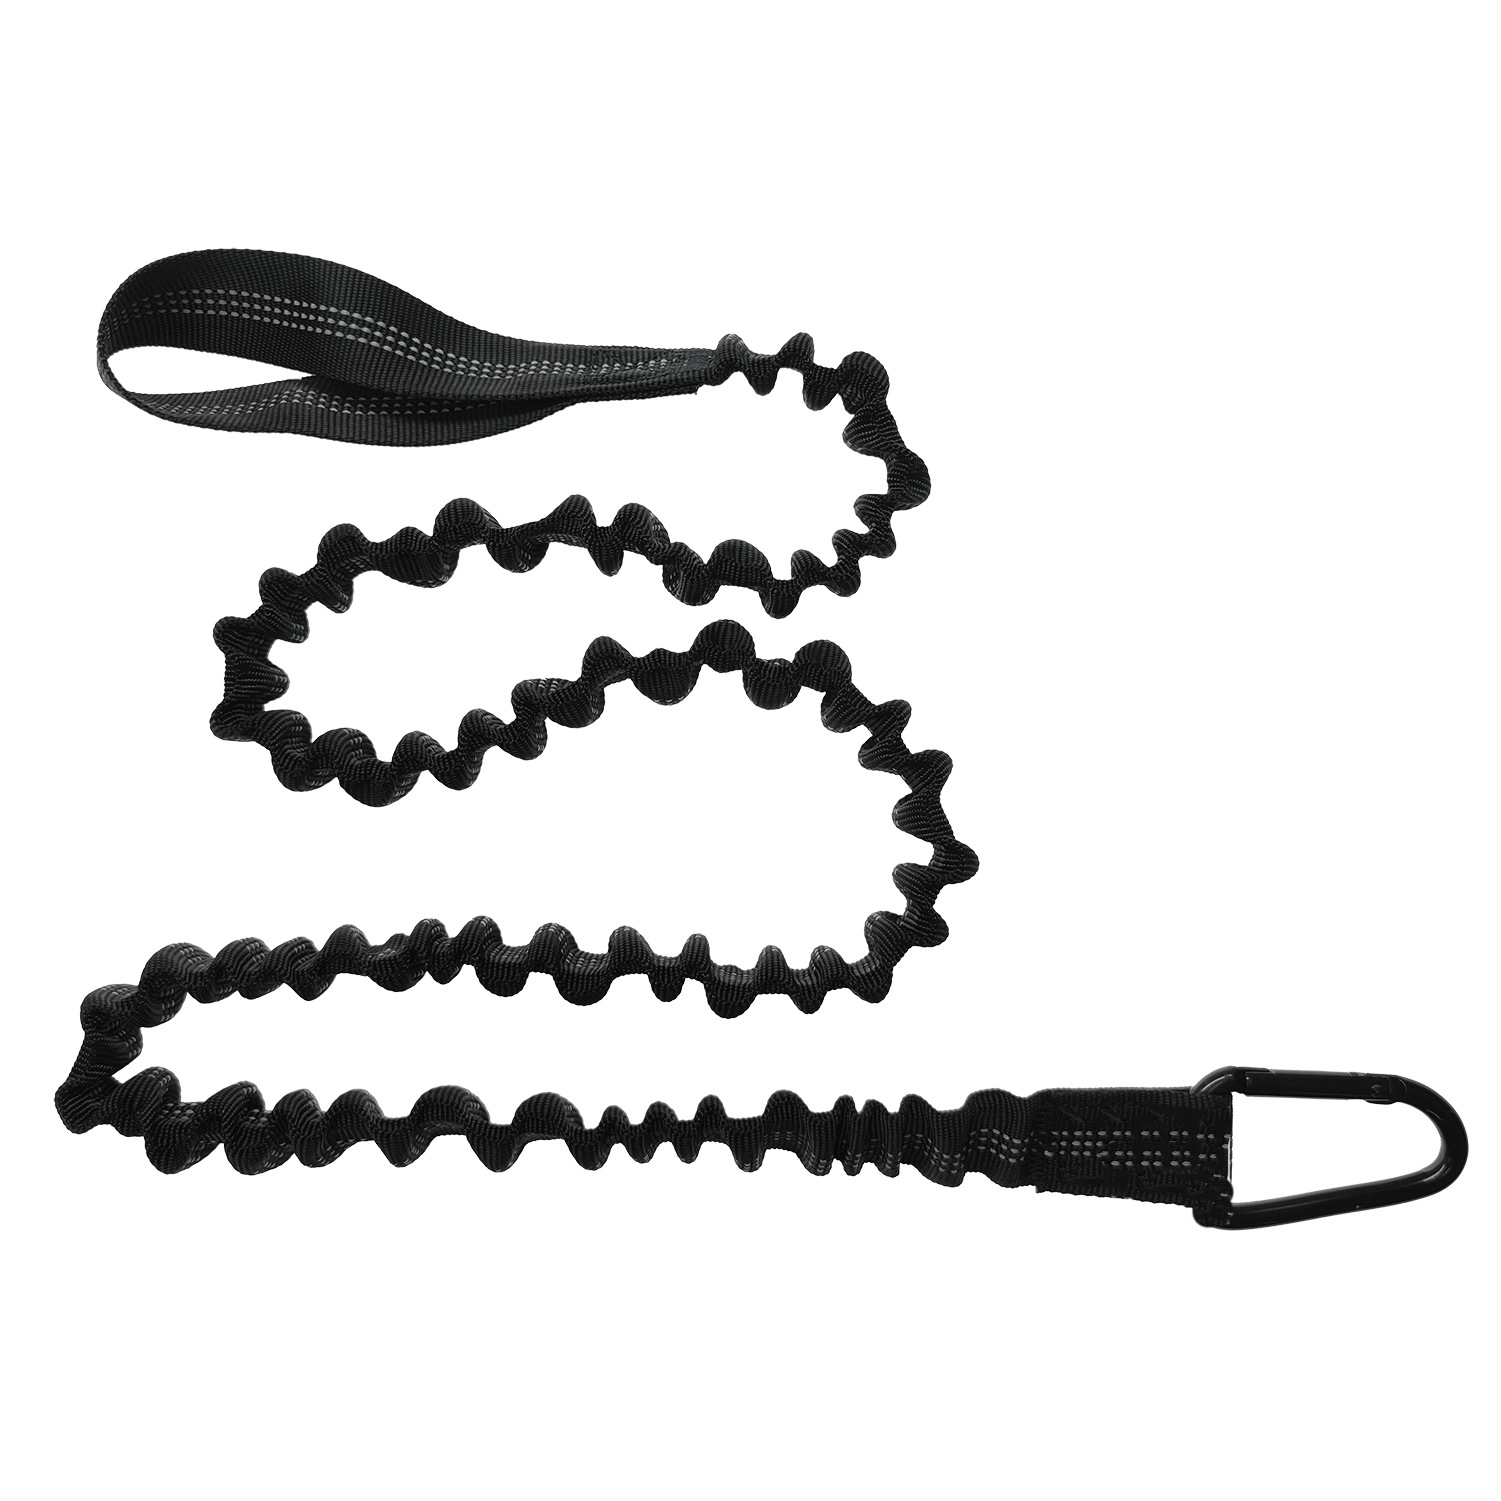 1pc Elastic Kayak Paddle Leash Adjustable With Safety Hook Fishing Rod Pole  Coiled Lanyard Cord Tie Rope Rowing Boat Accessories